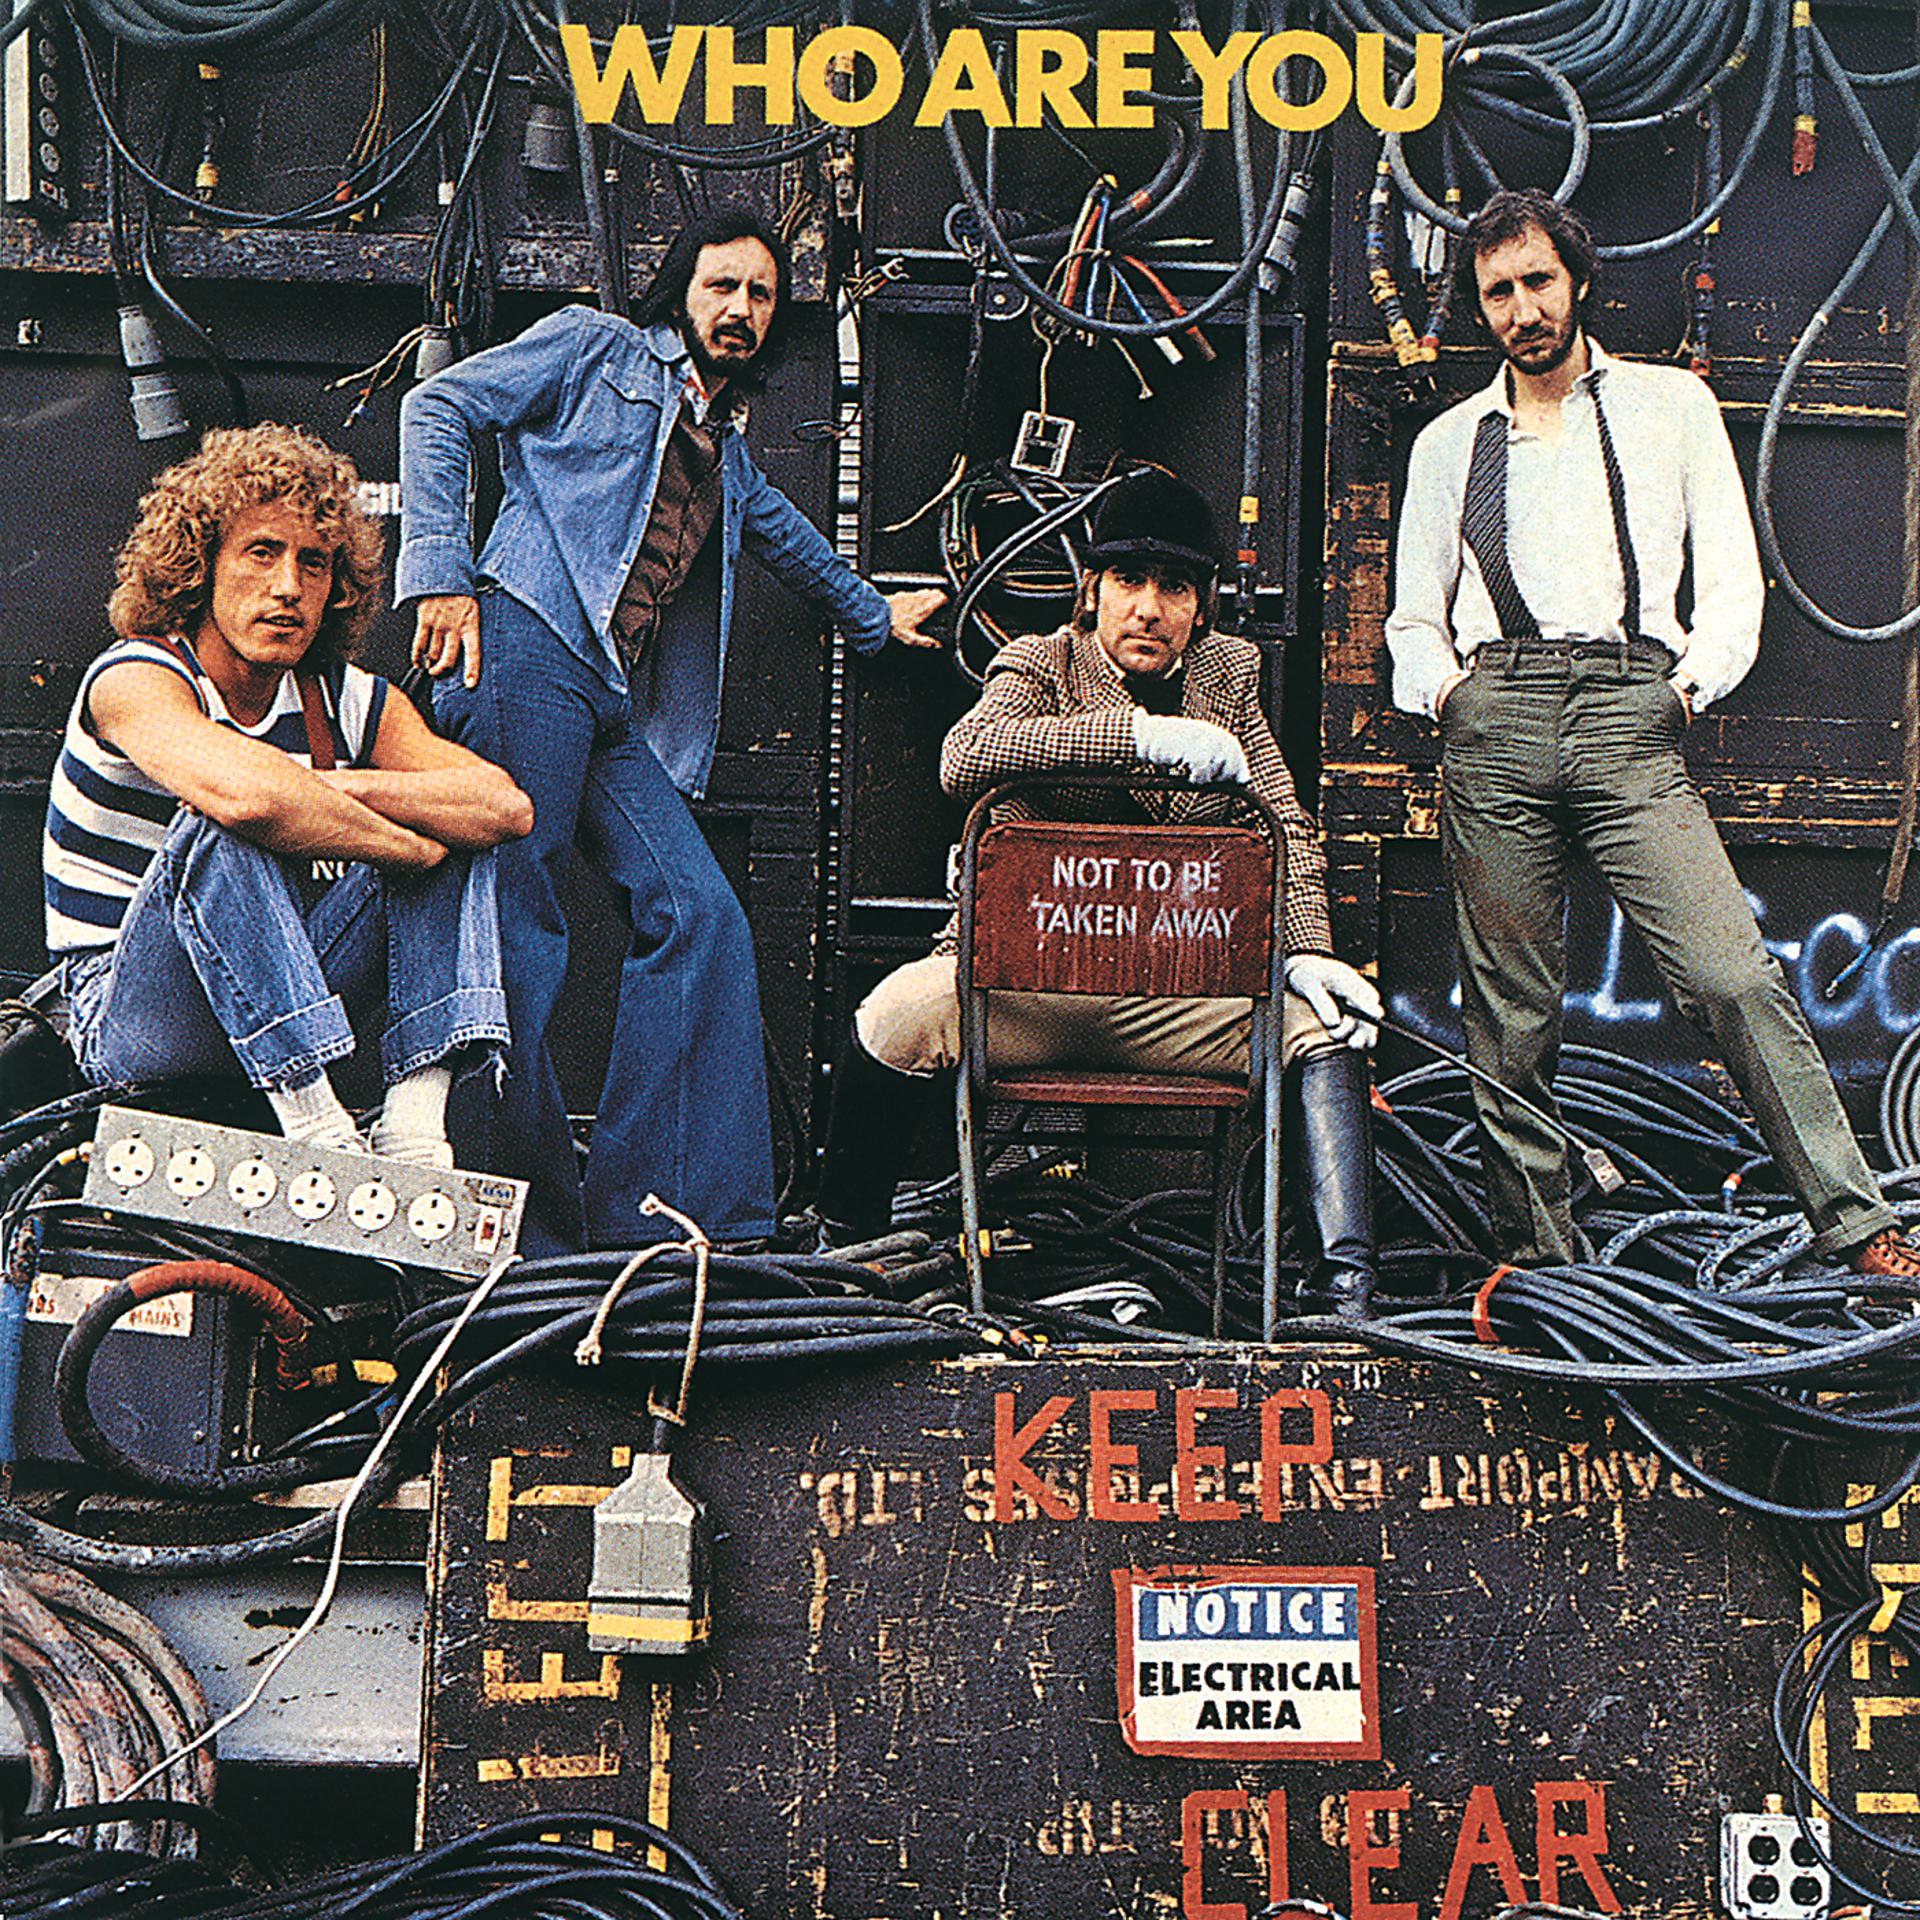 The who collection the who. The who who are you 1978. Who are you альбом. The who who are you 1978 CD. Известные обложки альбомов.